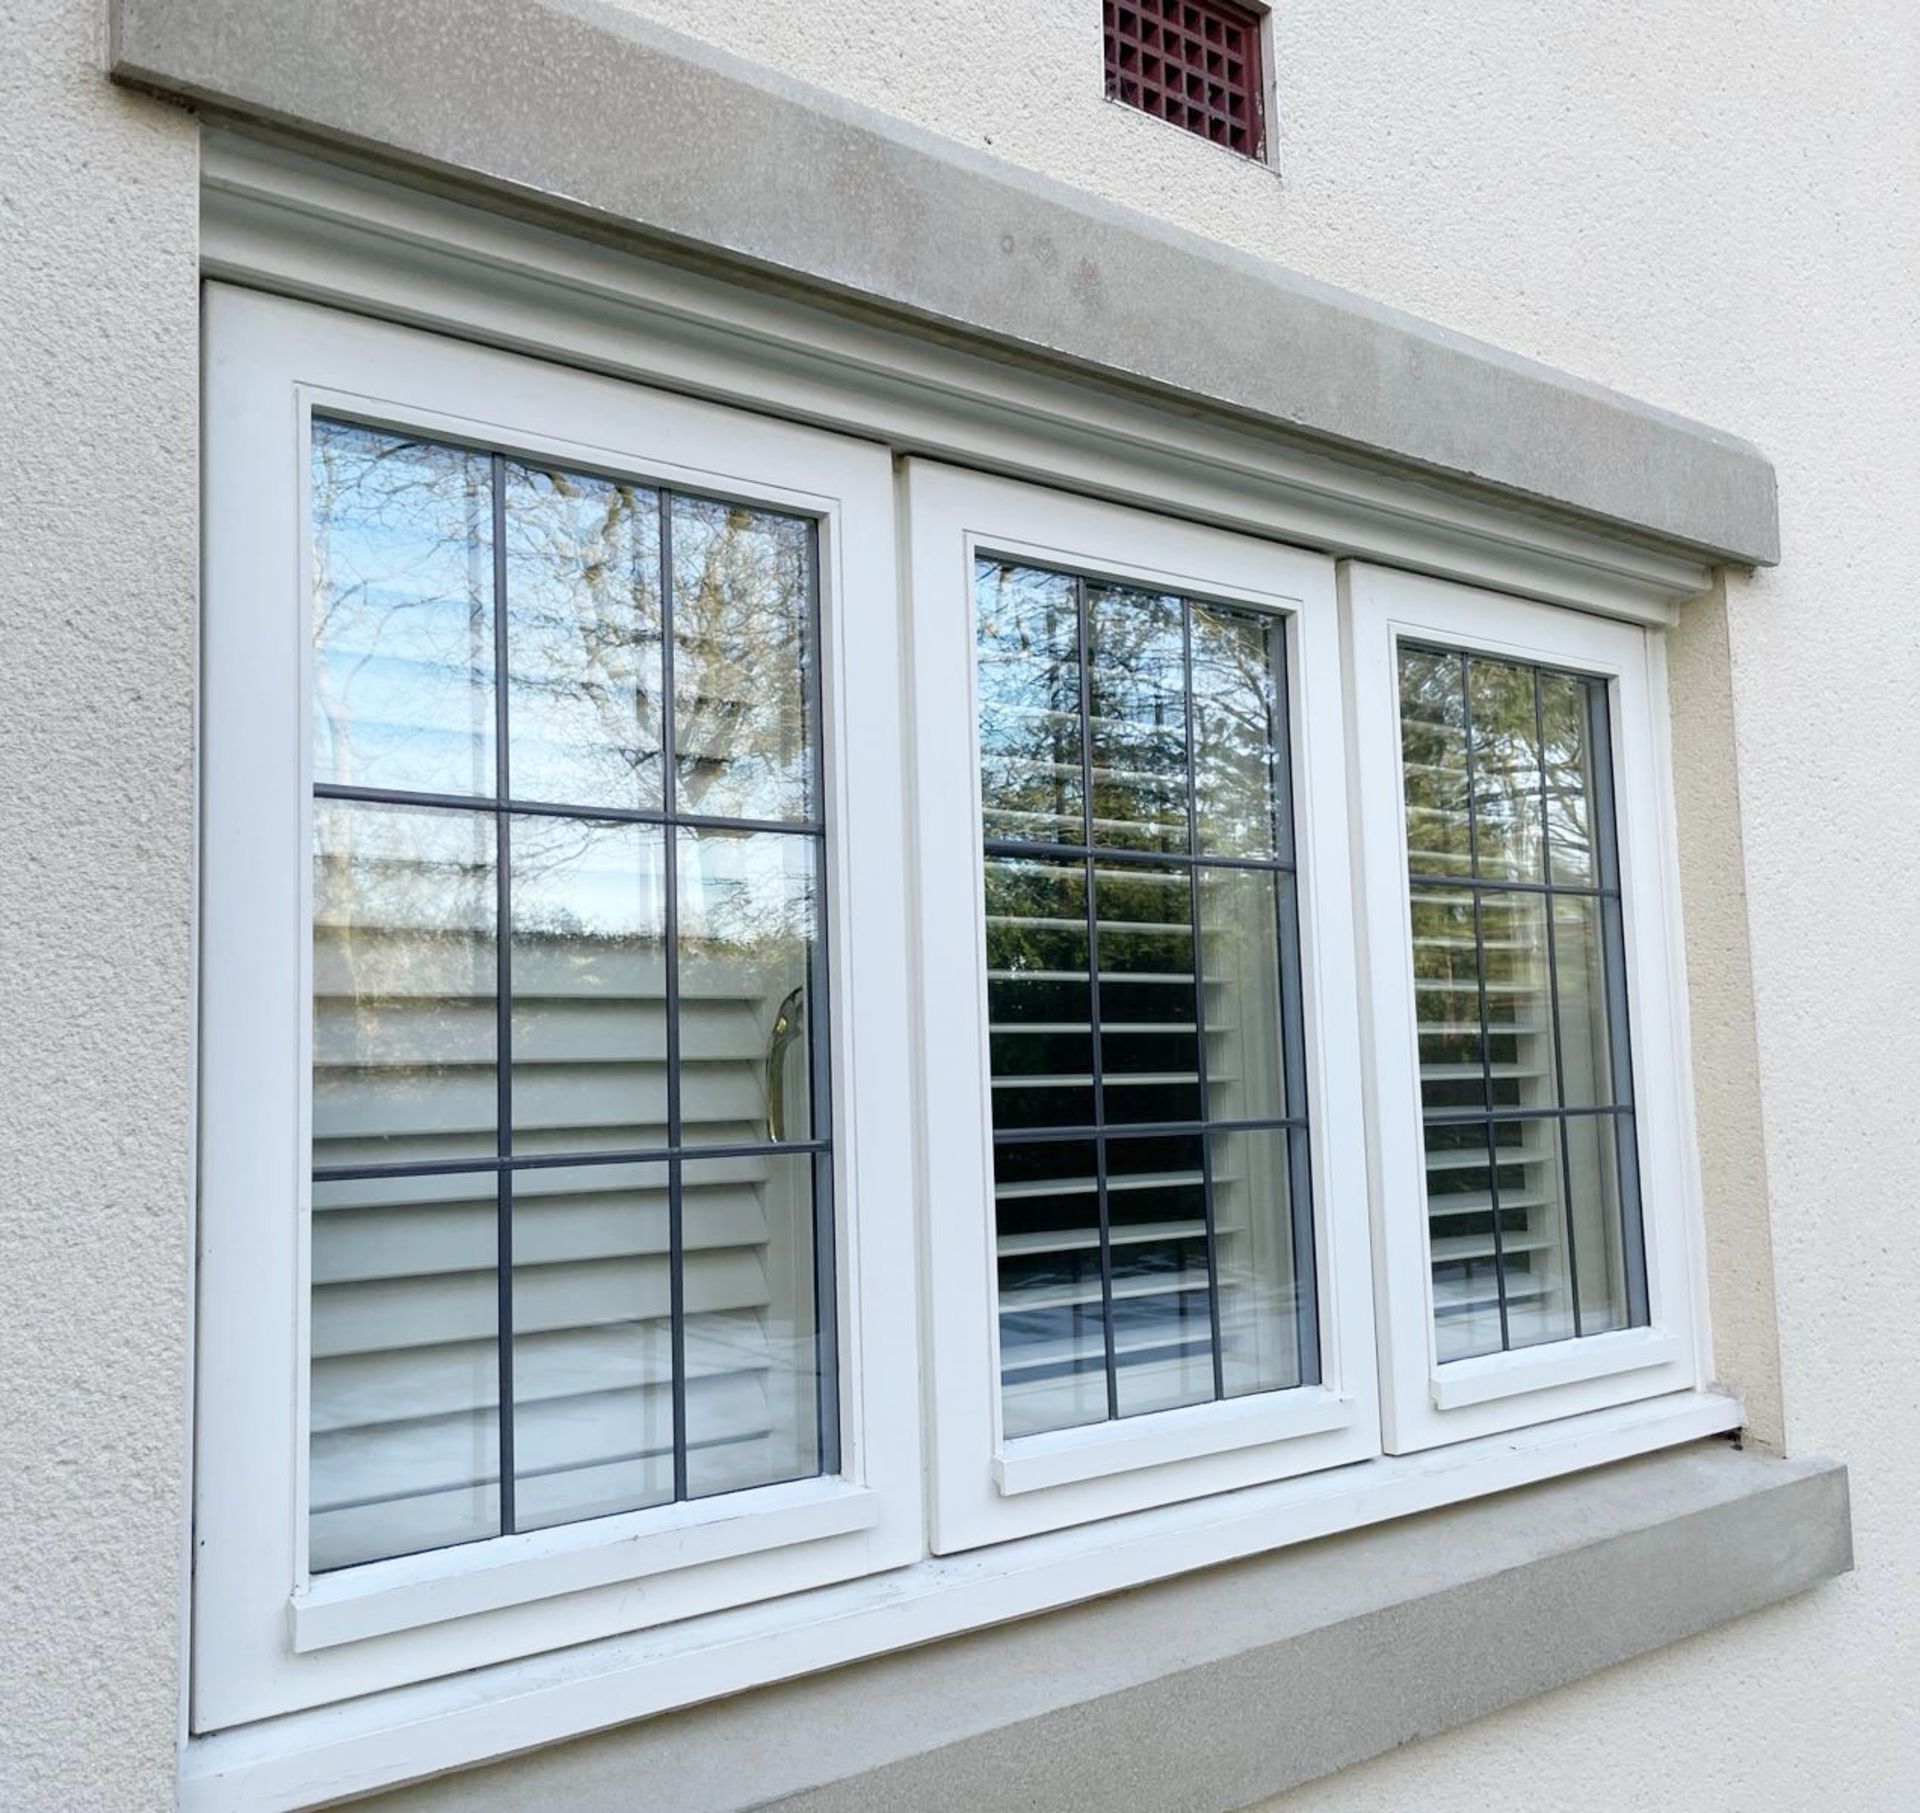 1 x Hardwood Timber Double Glazed Leaded 3-Pane Window Frame fitted with Shutter Blinds - Image 15 of 15